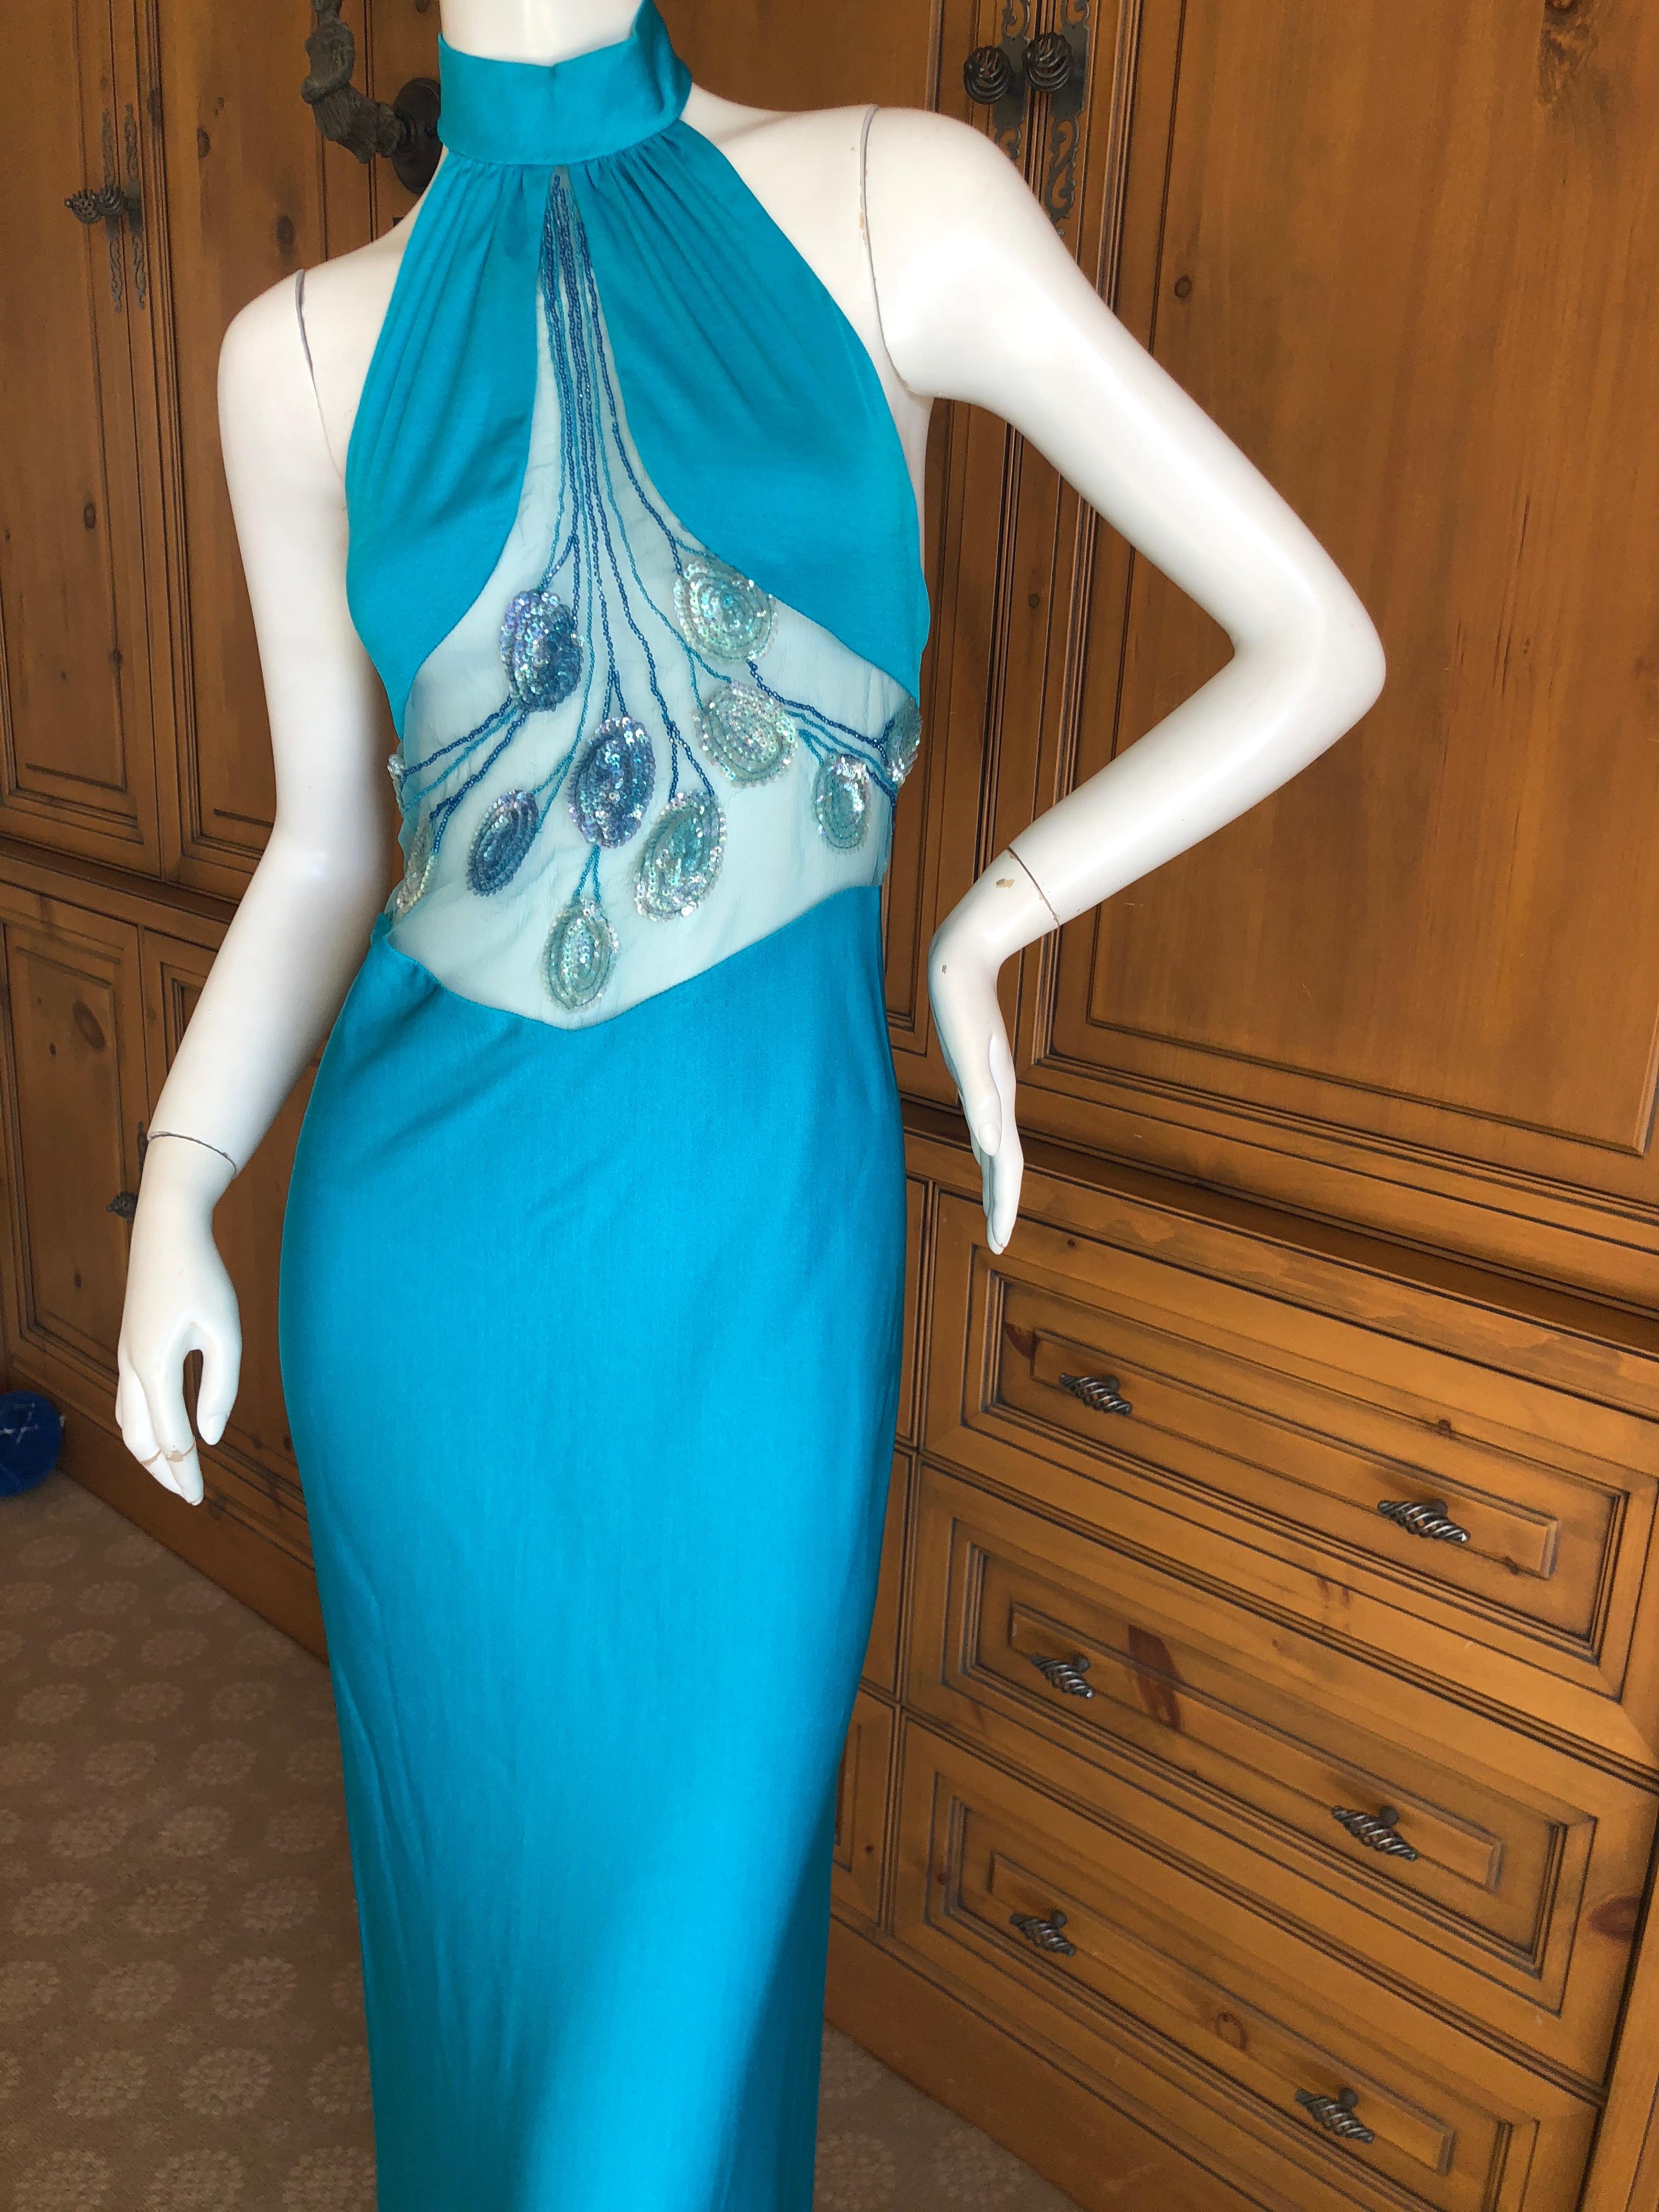 Loris Azzaro Couture 1970s Sheer Sequin Accented Turquoise Blue Dress and Cape 1